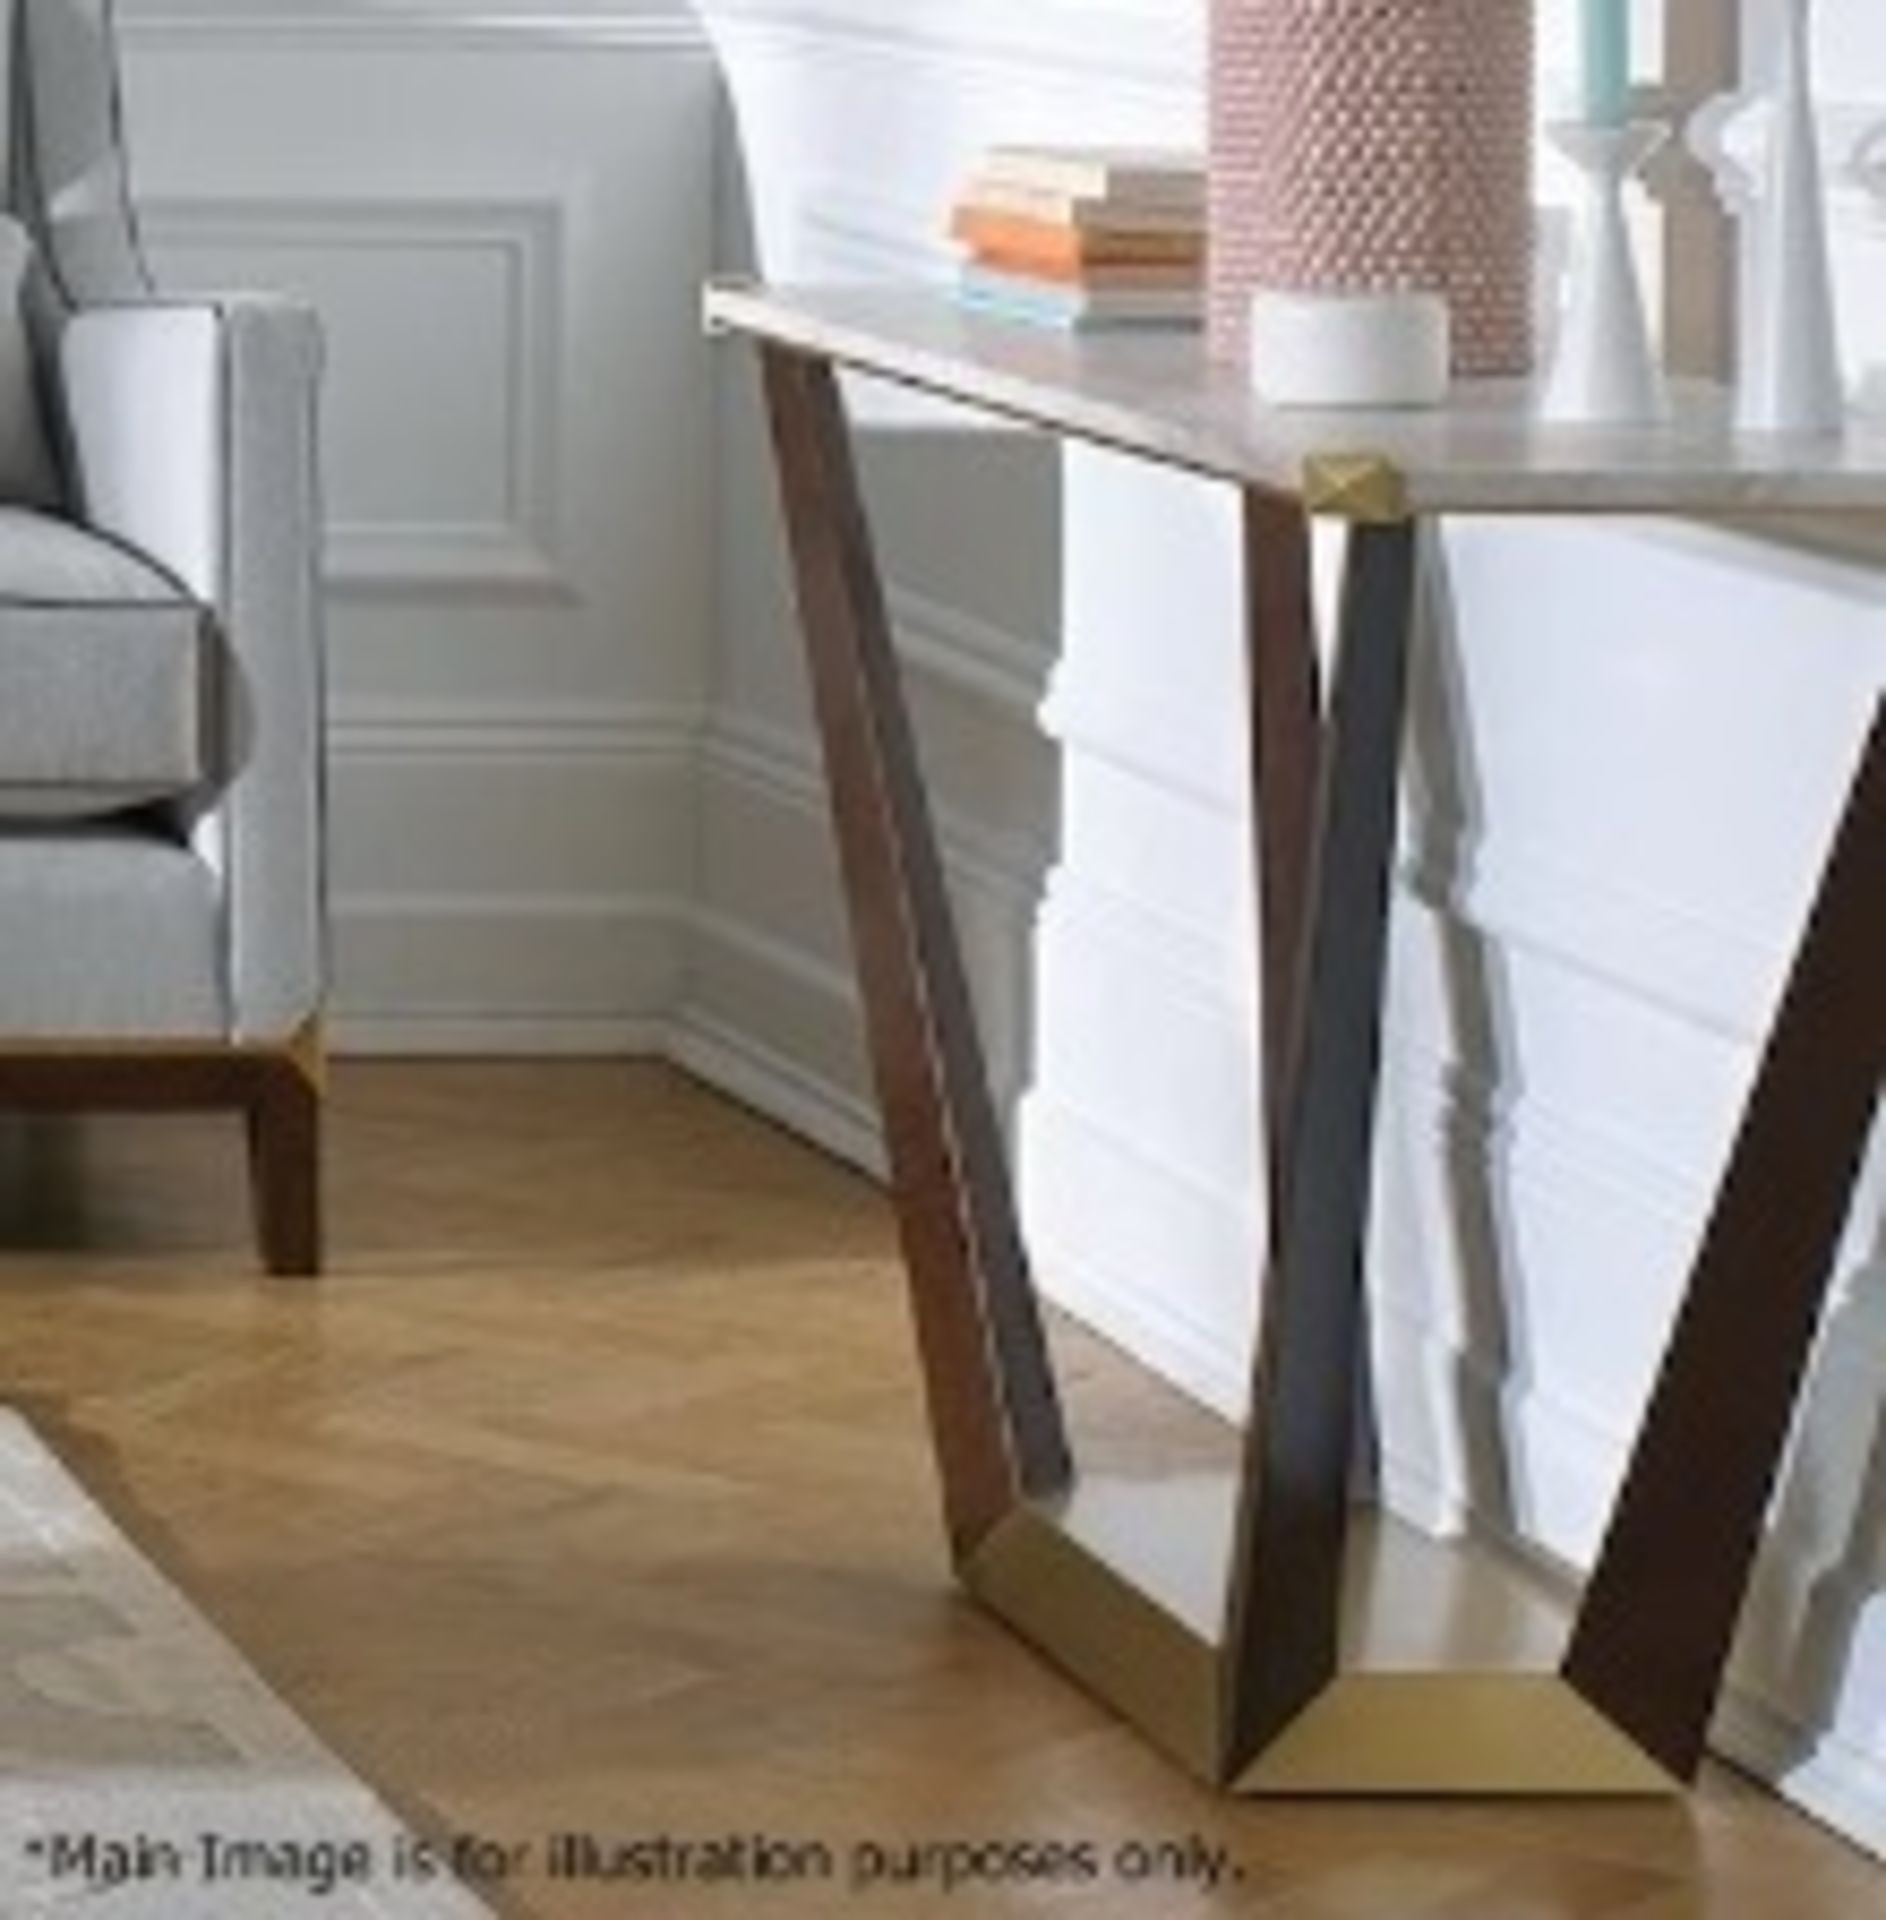 1 x PORADA Sayre Console Table (Base Only) - Ref: 5568974 NP2/18 - CL011 - Location: Altrincham WA14 - Image 6 of 7